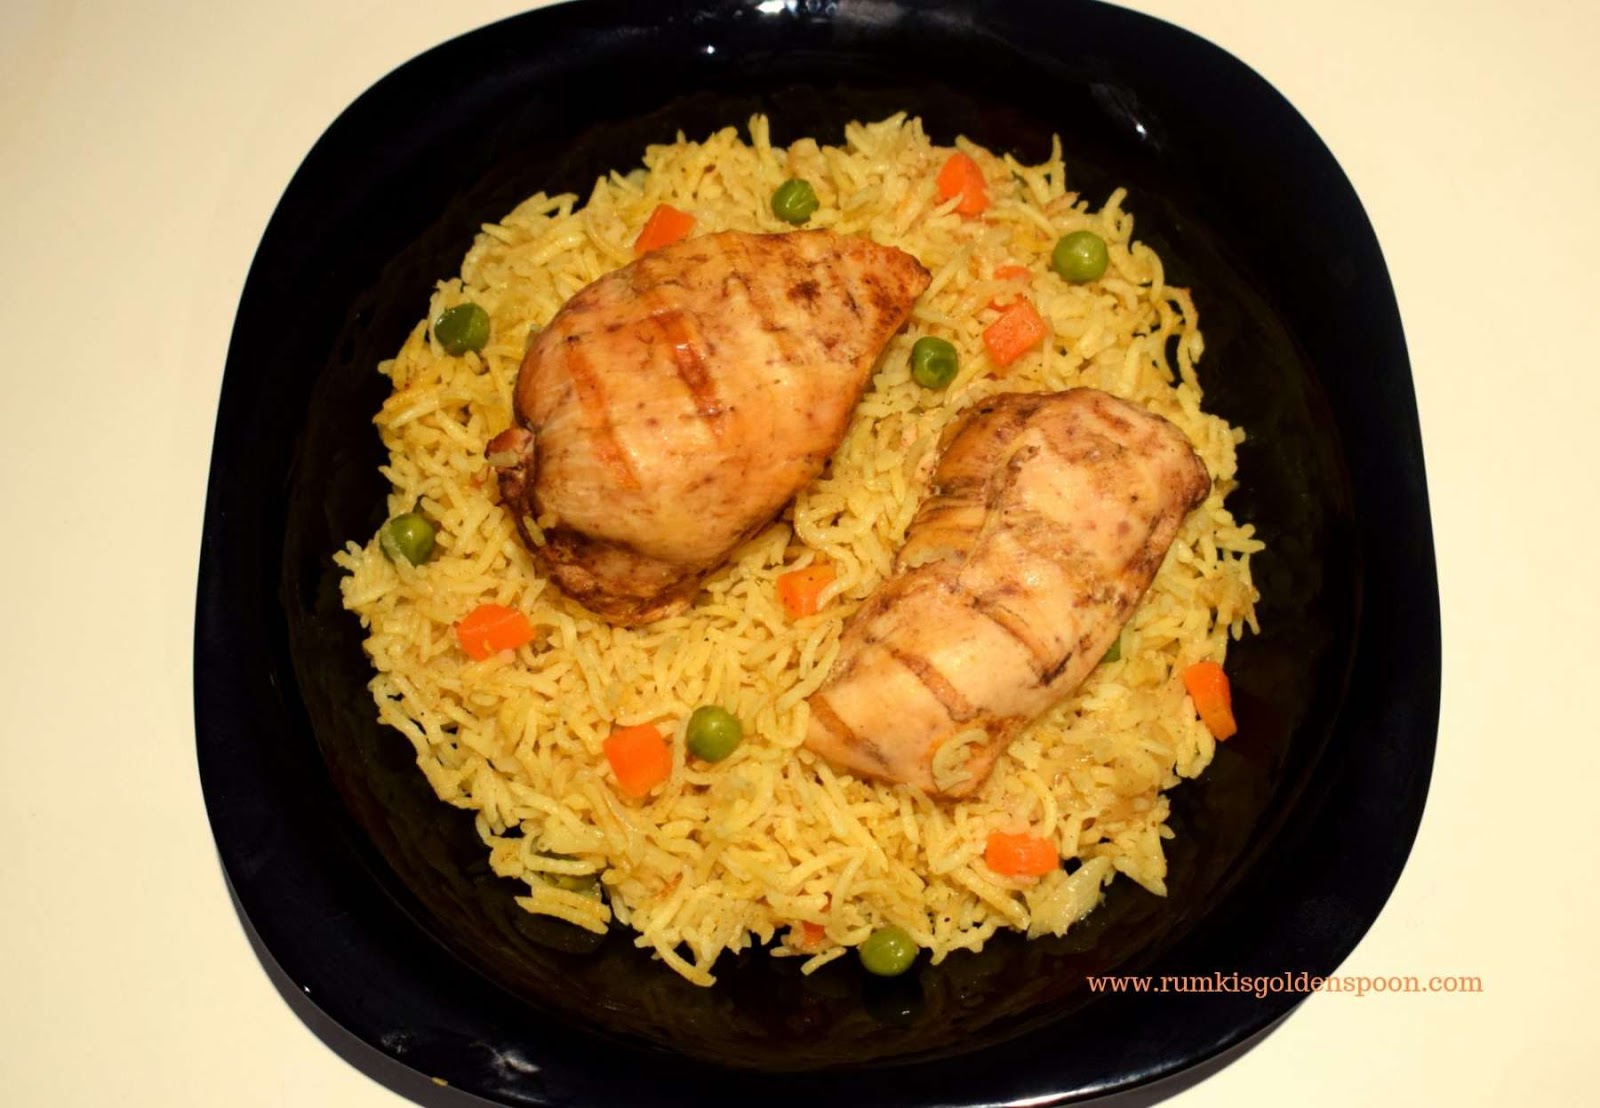 leftover chicken recipes, recipes for leftover chicken breast, recipes with leftover chicken breast, recipes with leftover chicken breast, recipes with leftover chicken breast, chicken pulao, leftover chicken and rice, one pot meal, rice recipe, Rumki's Golden Spoon